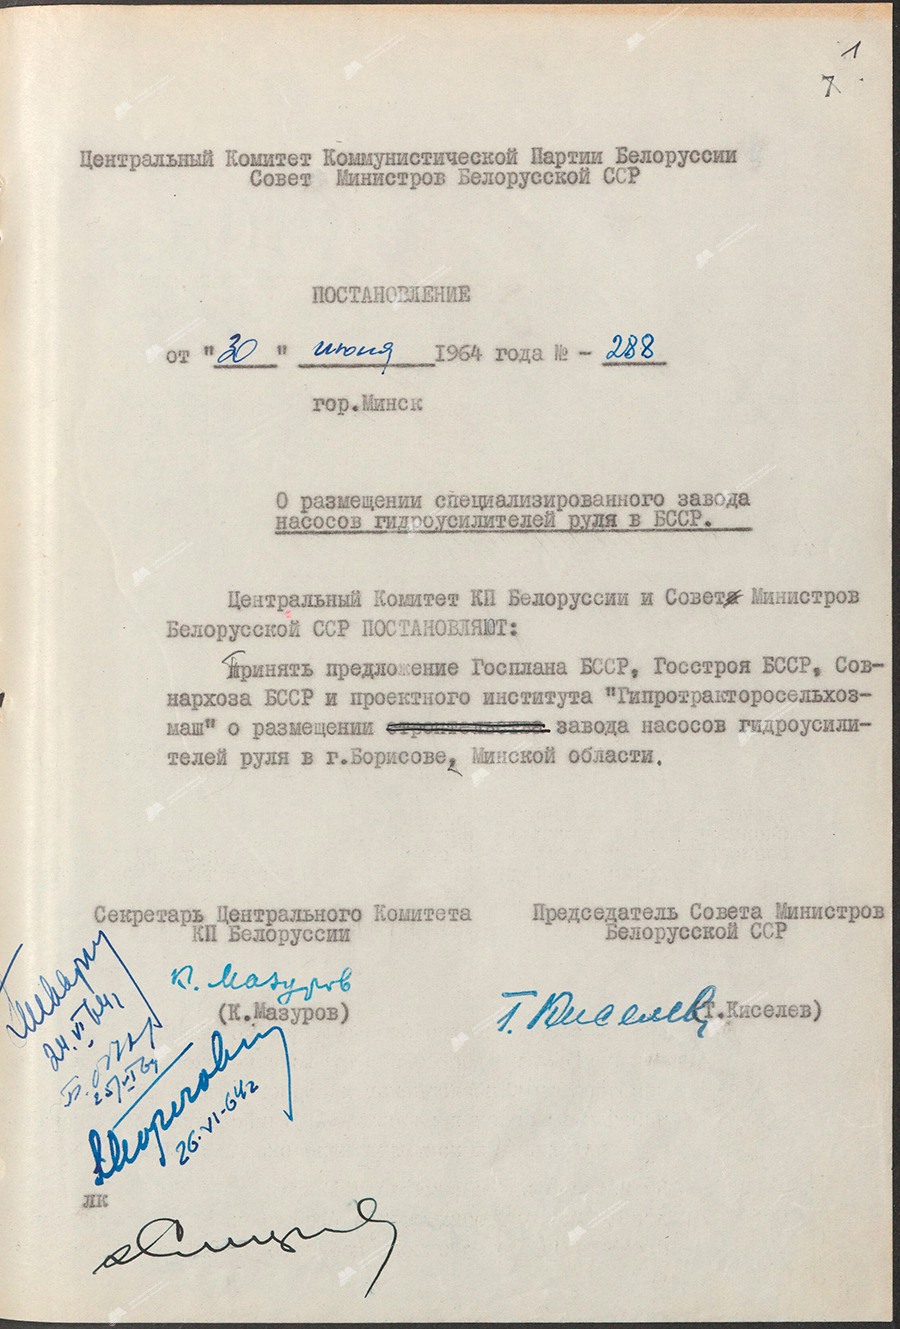 Resolution No. 288 of the Central Committee of the Communist Party of Belarus and the Council of Ministers of the BSSR «On the location of a specialized plant for power steering pumps in the BSSR»-стр. 0